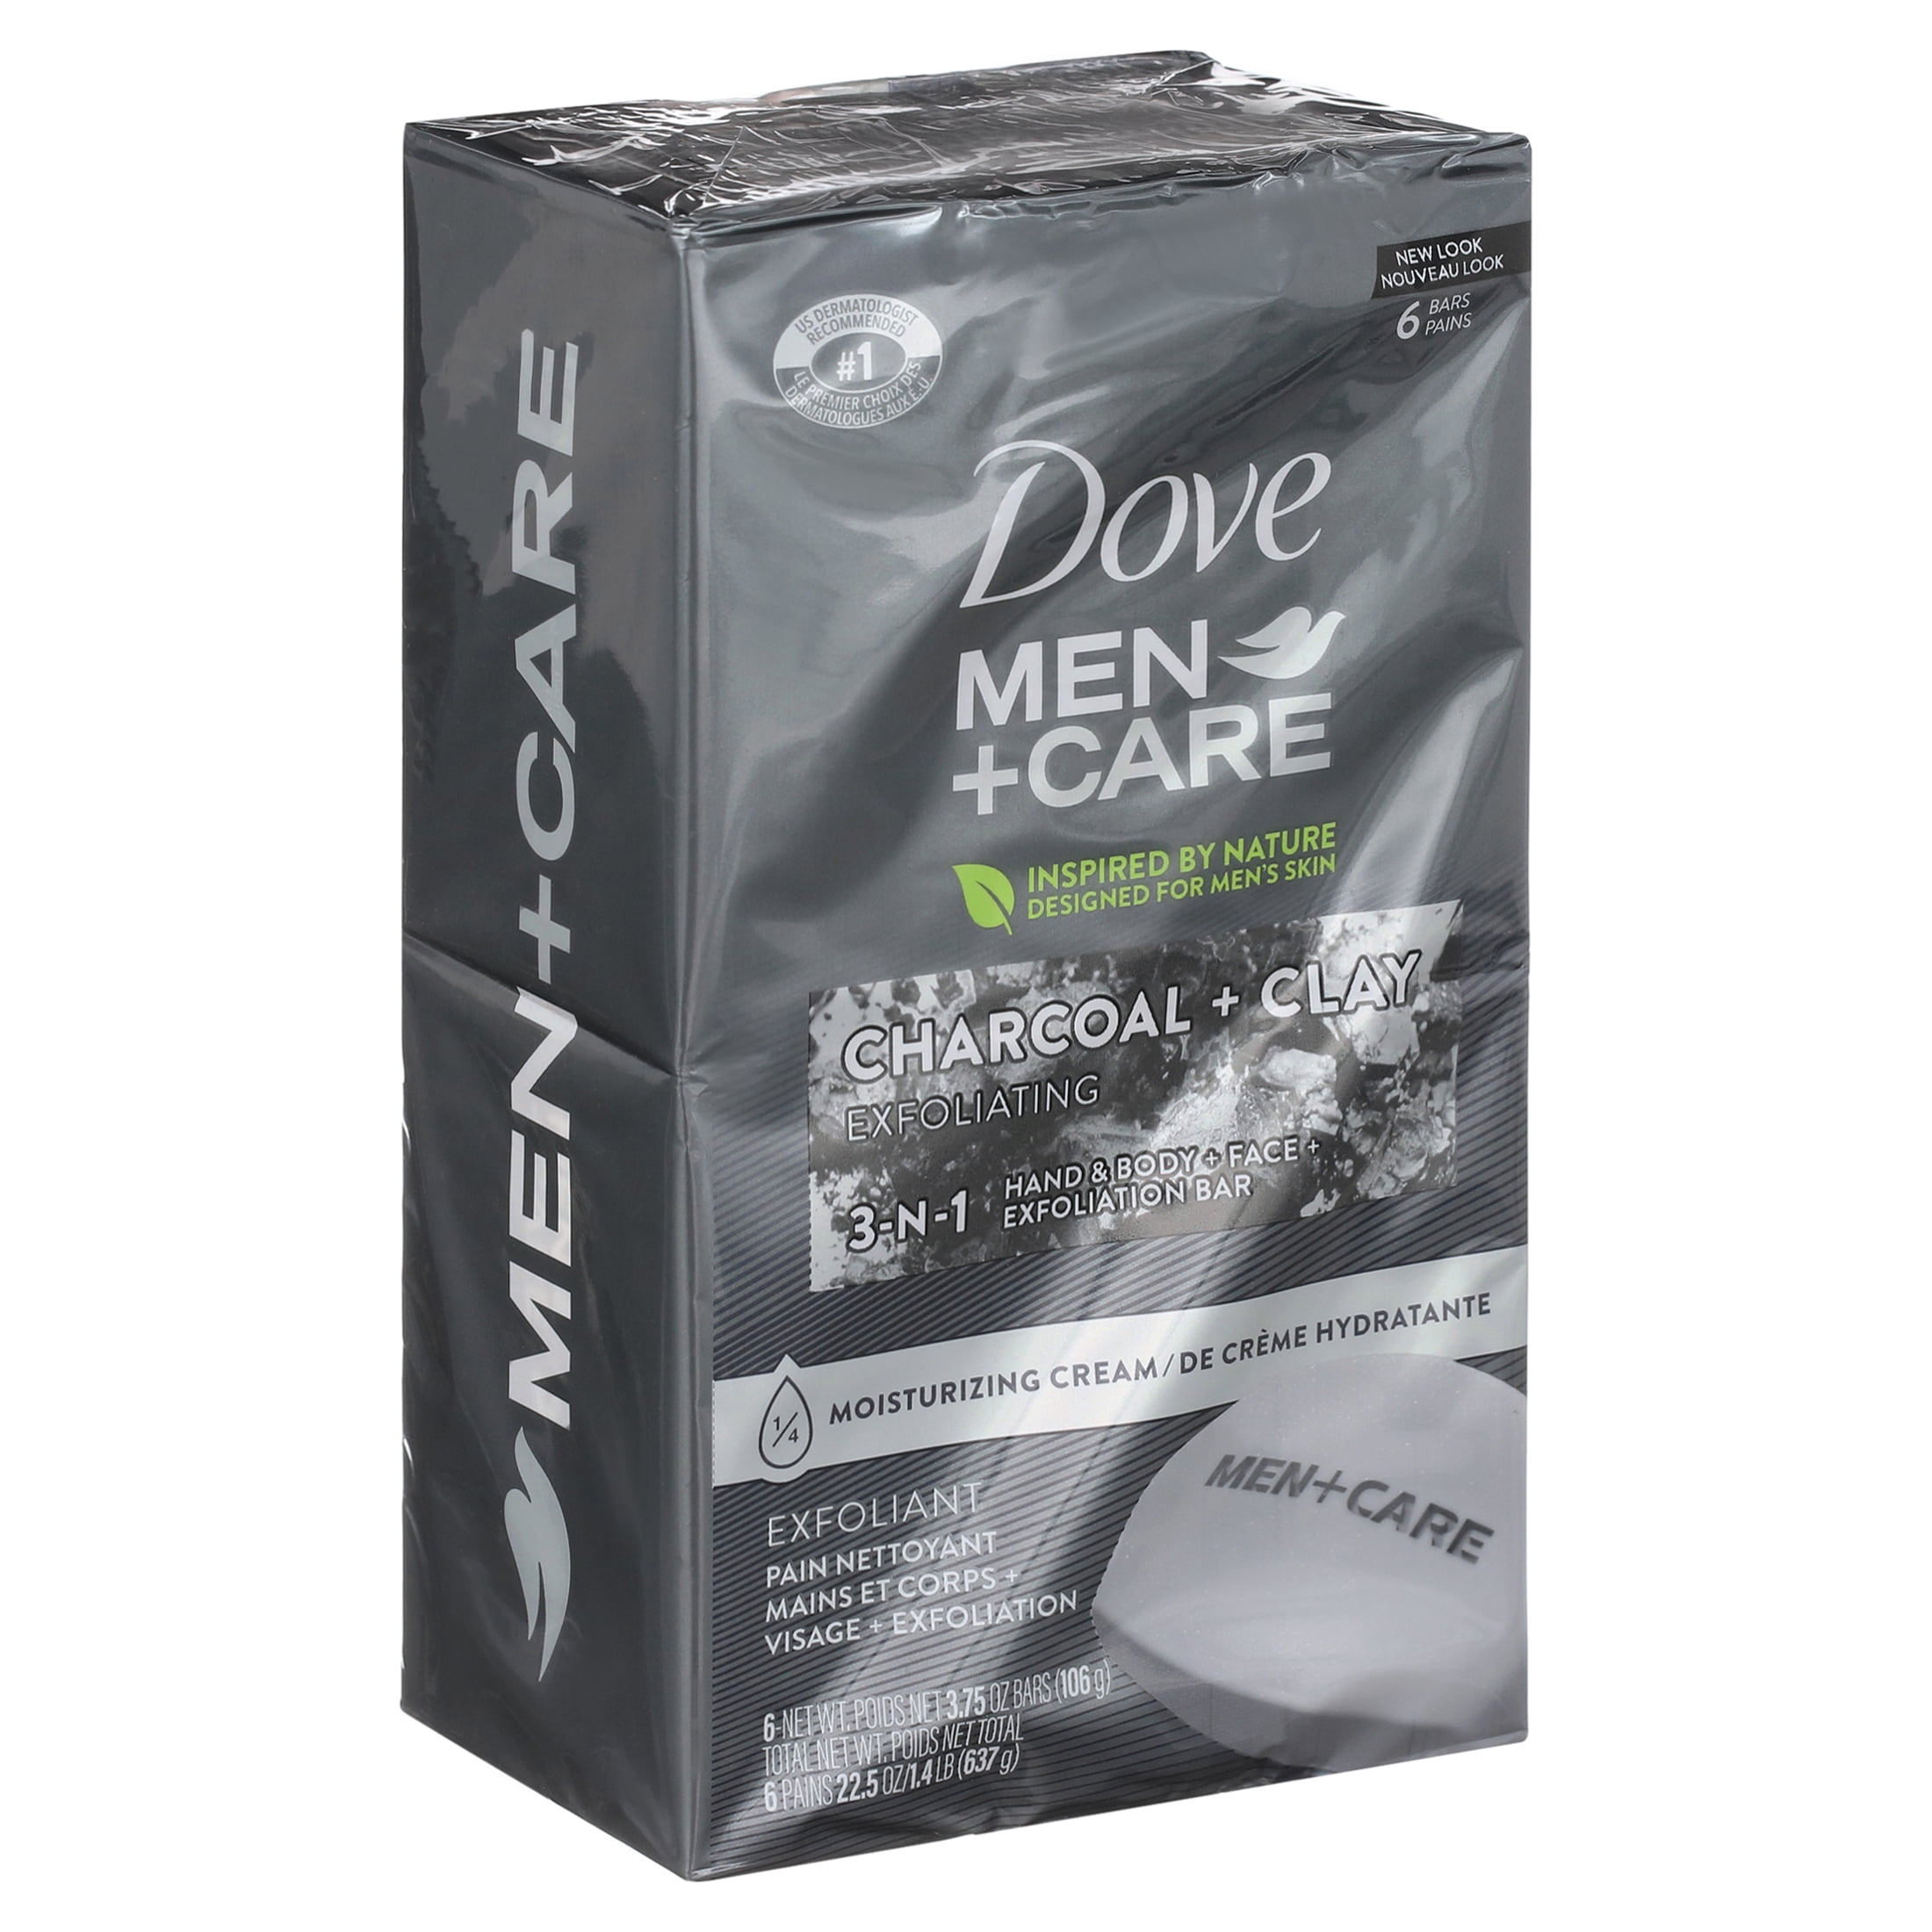 DOVE MEN + CARE Plant-Powered Natural Essential Oil Bar Soap Exfoliating  Charcoal + Clove Oil to Clean and Hydrate Mens Skin 4 count 4-in-1 Bar Soap